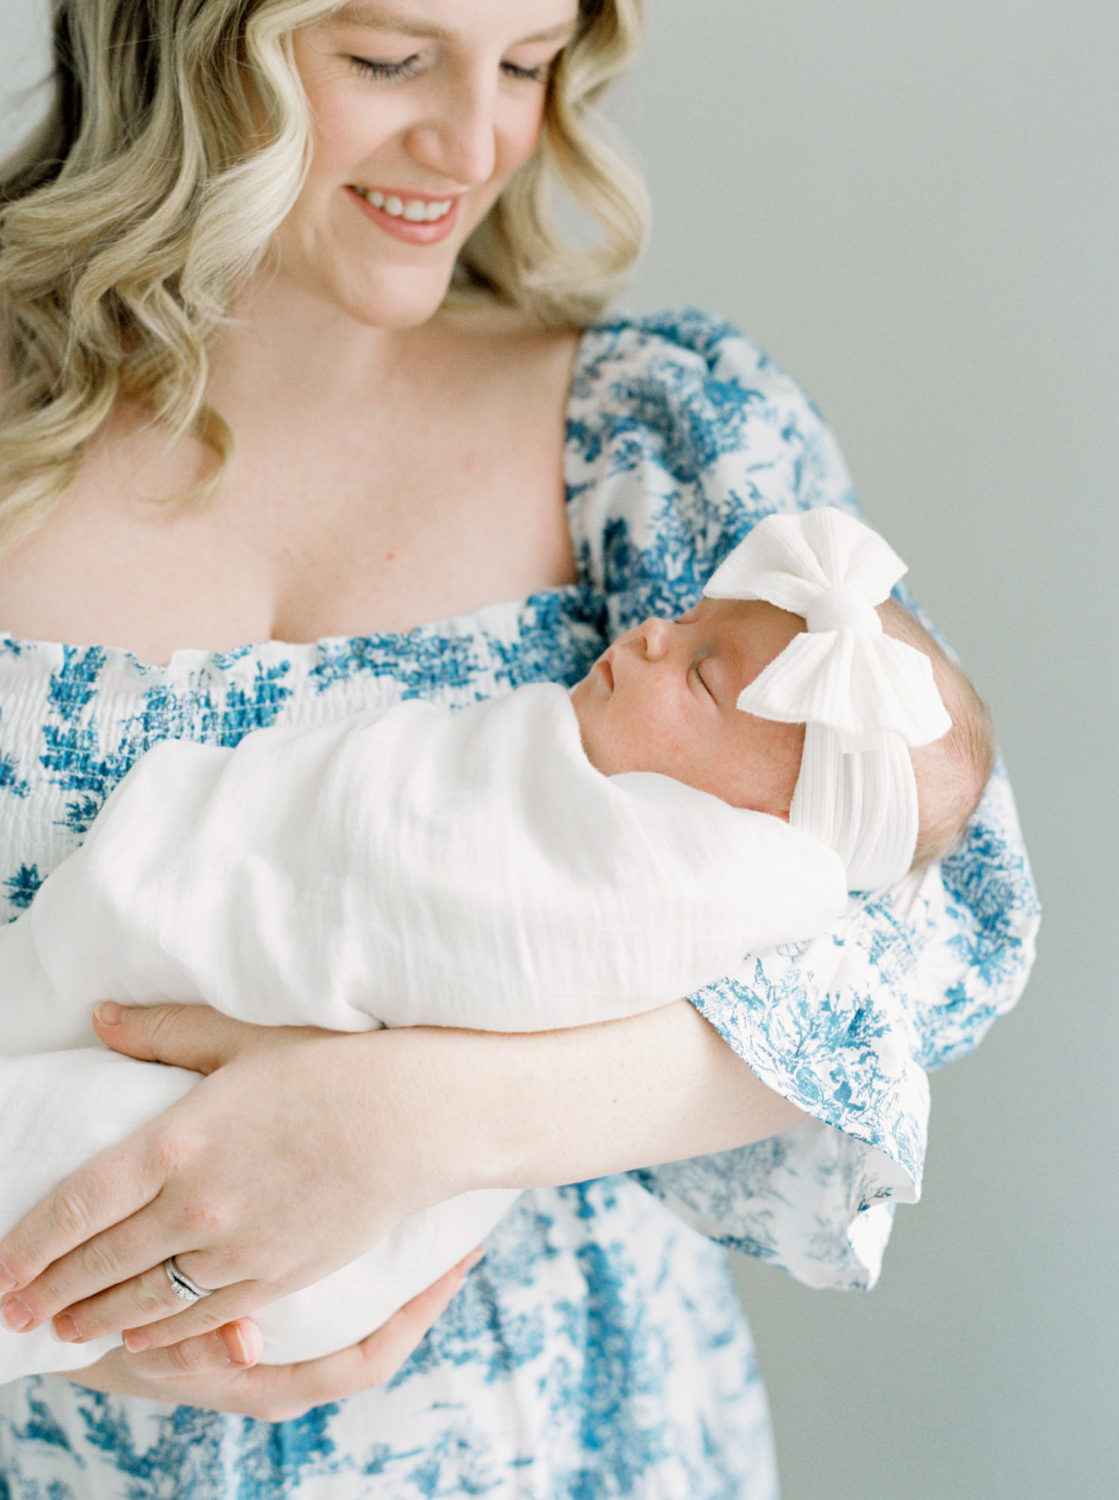 smiling woman with blonde hair in blue and white dress holding a sleeping baby wrapped in white blanket wearing a white bow